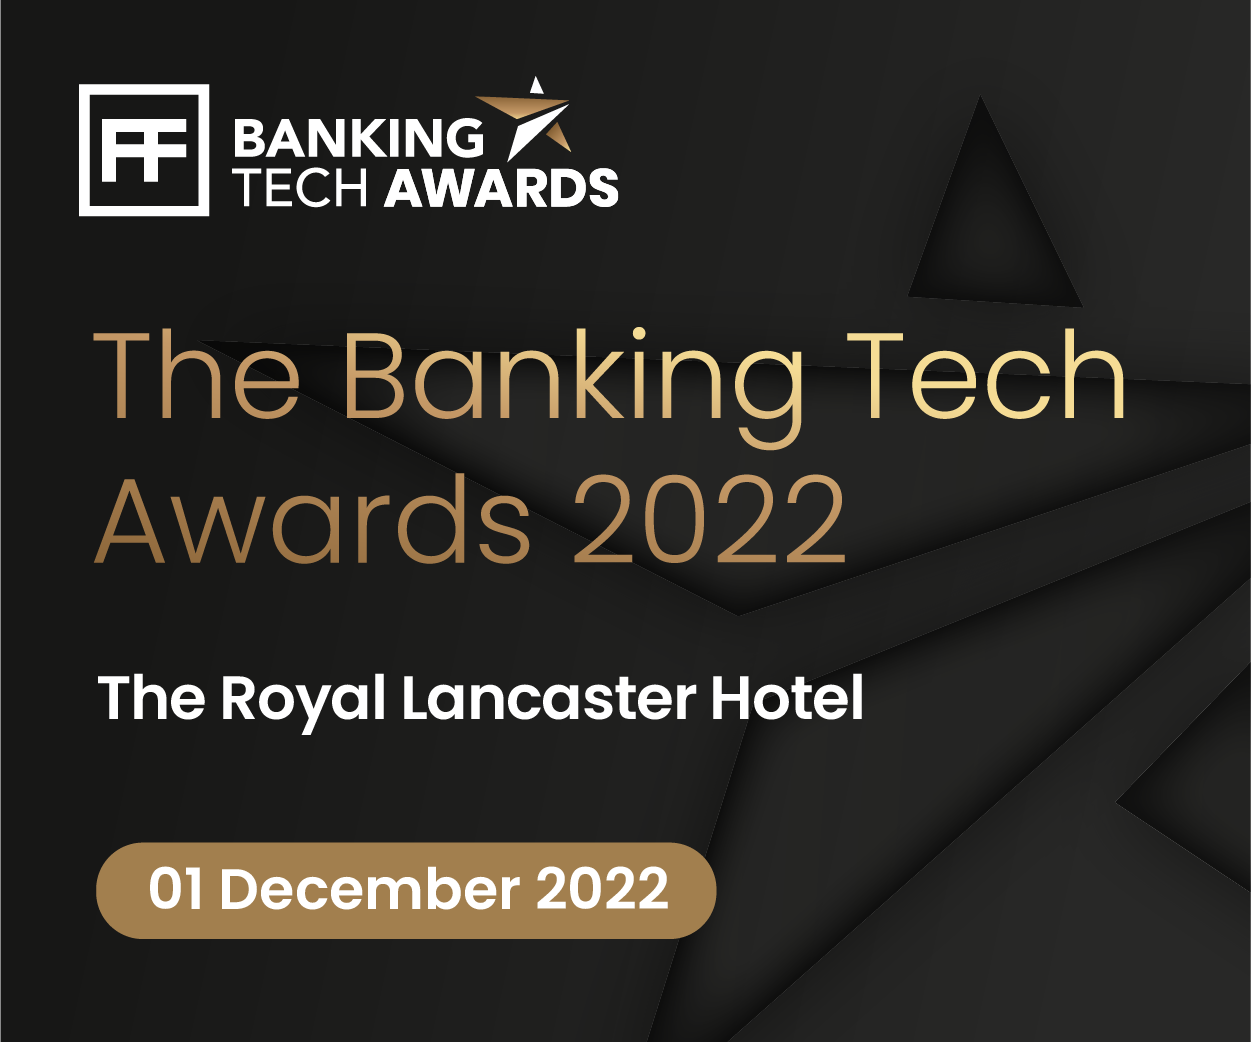 Less than two weeks until nomination deadline for Banking Tech Awards 2022